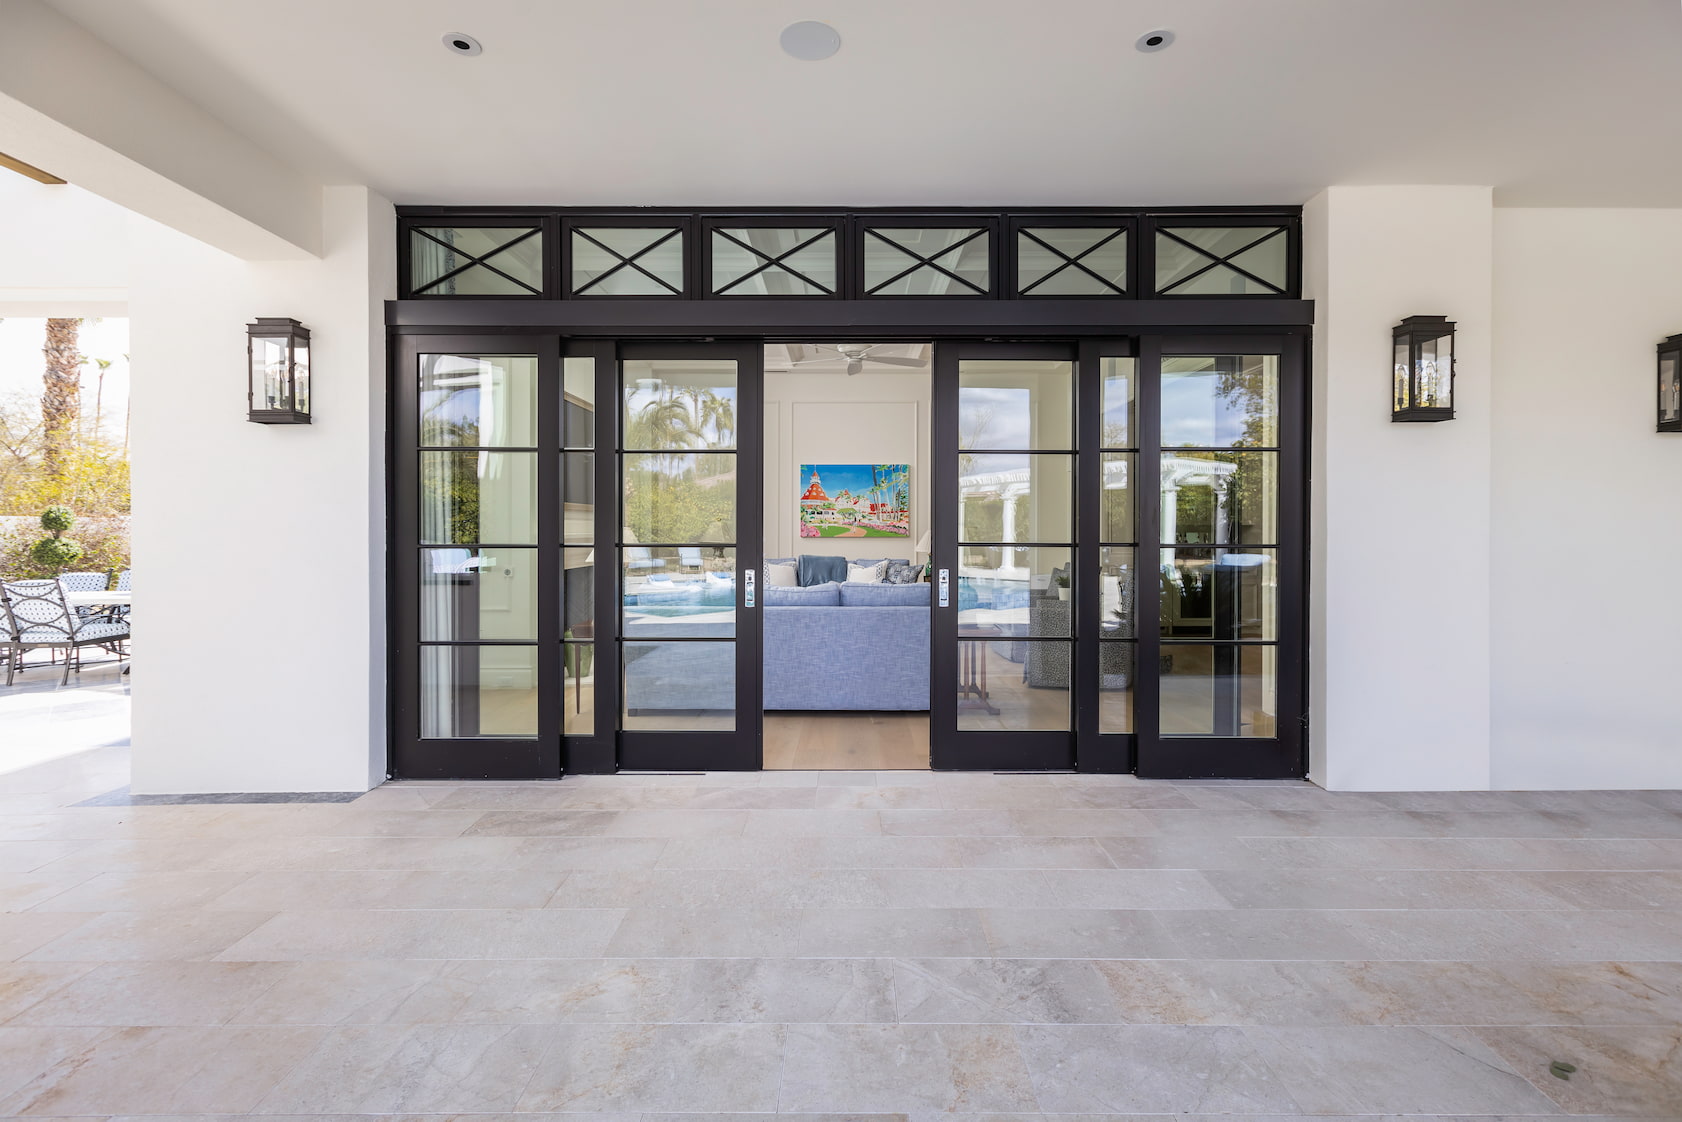 Black multi-slide patio doors with transom windows contrast the white stucco of this home's exterior.